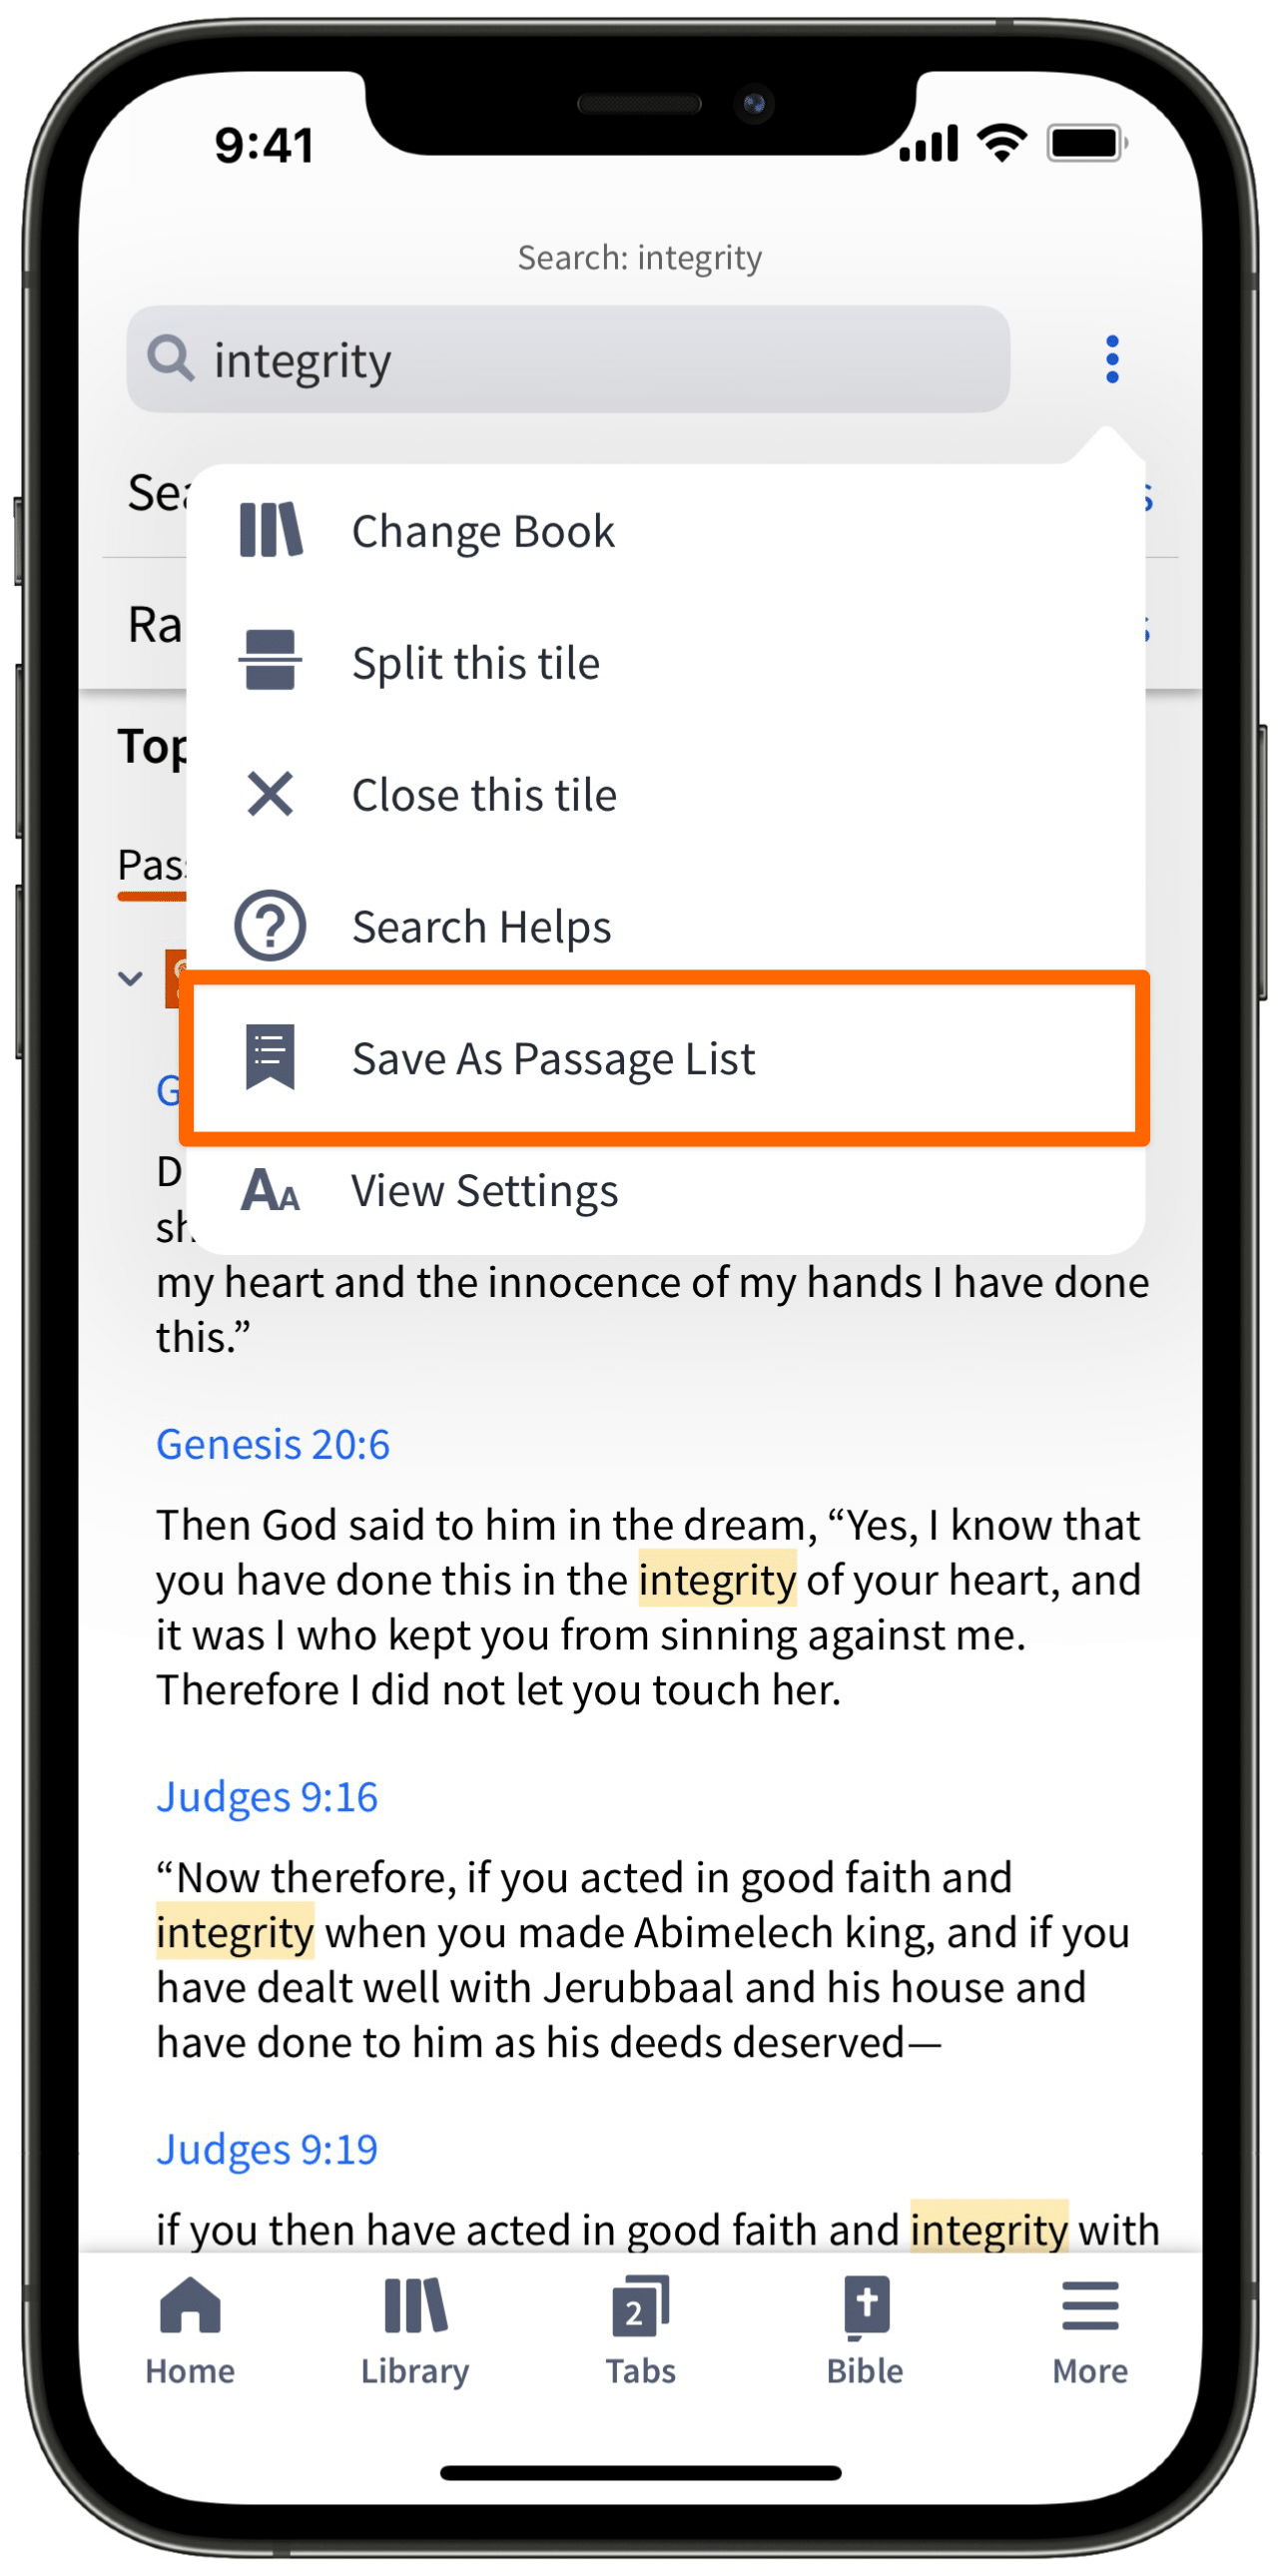 Save Search To Passage List